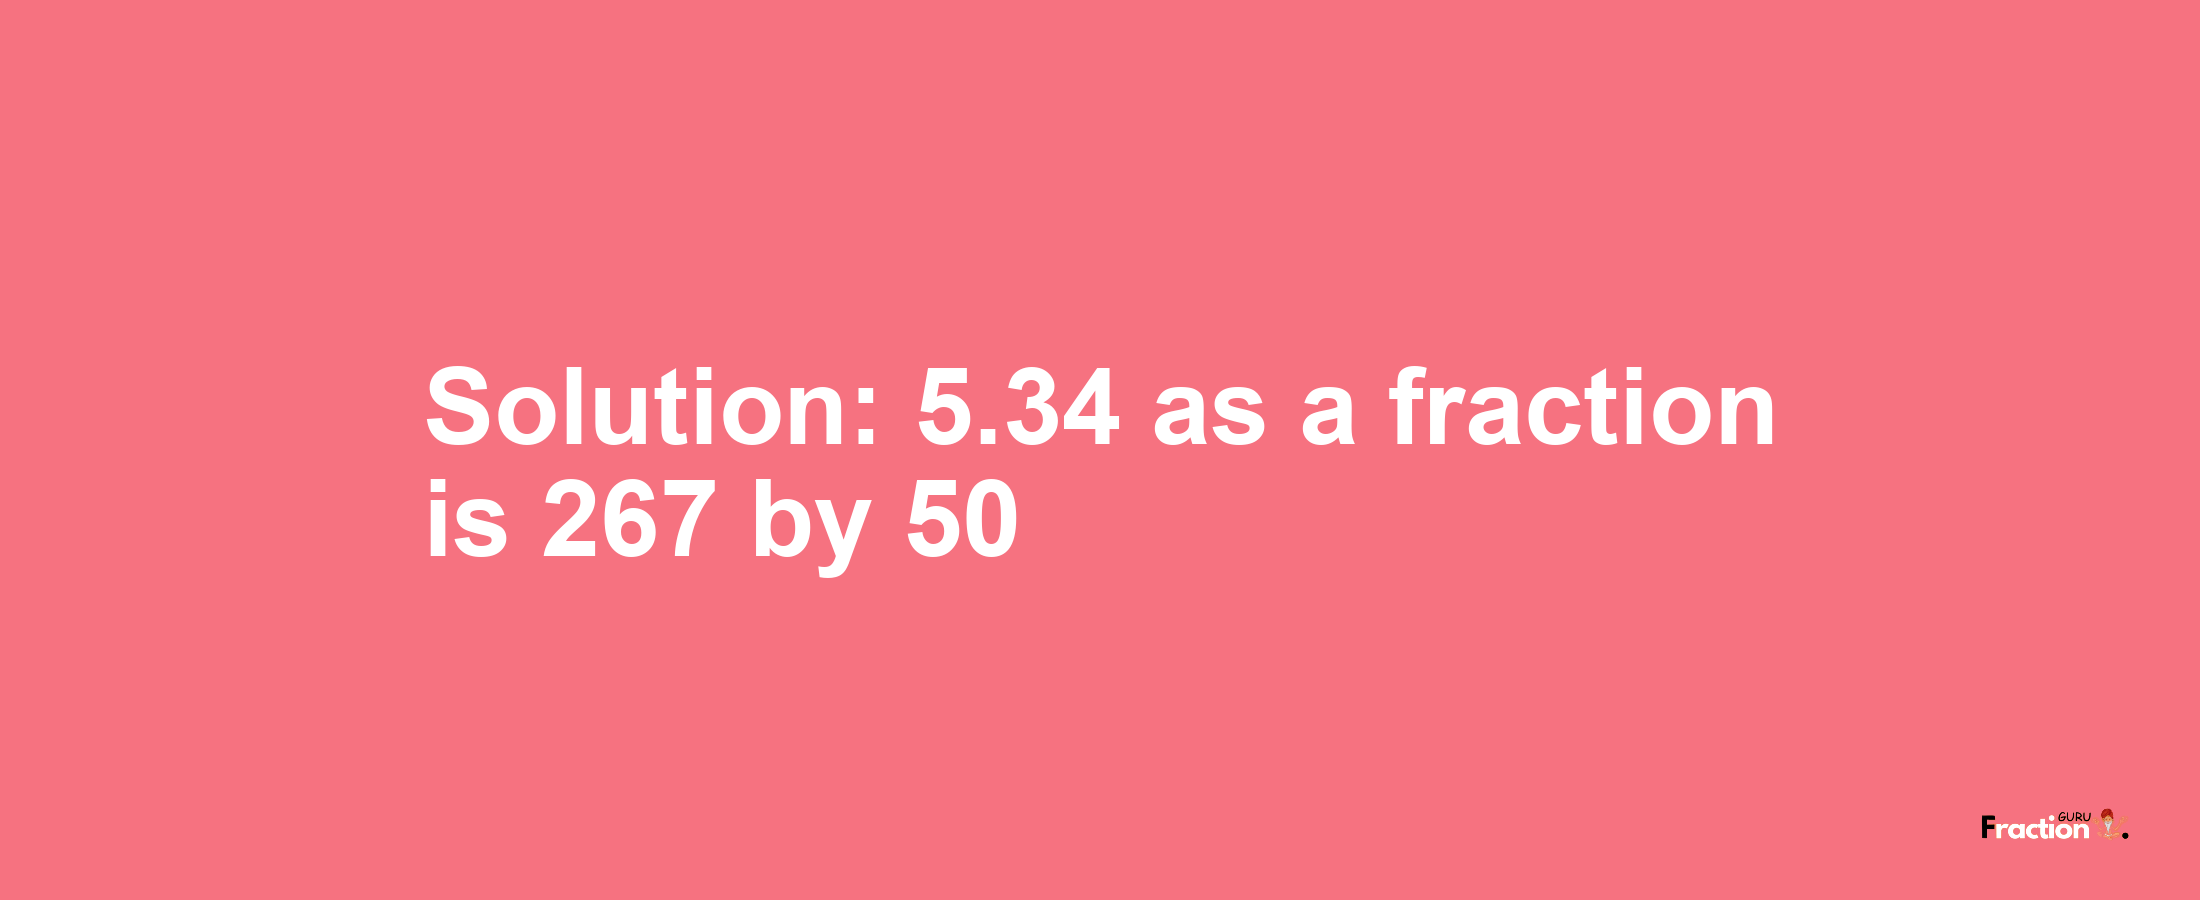 Solution:5.34 as a fraction is 267/50